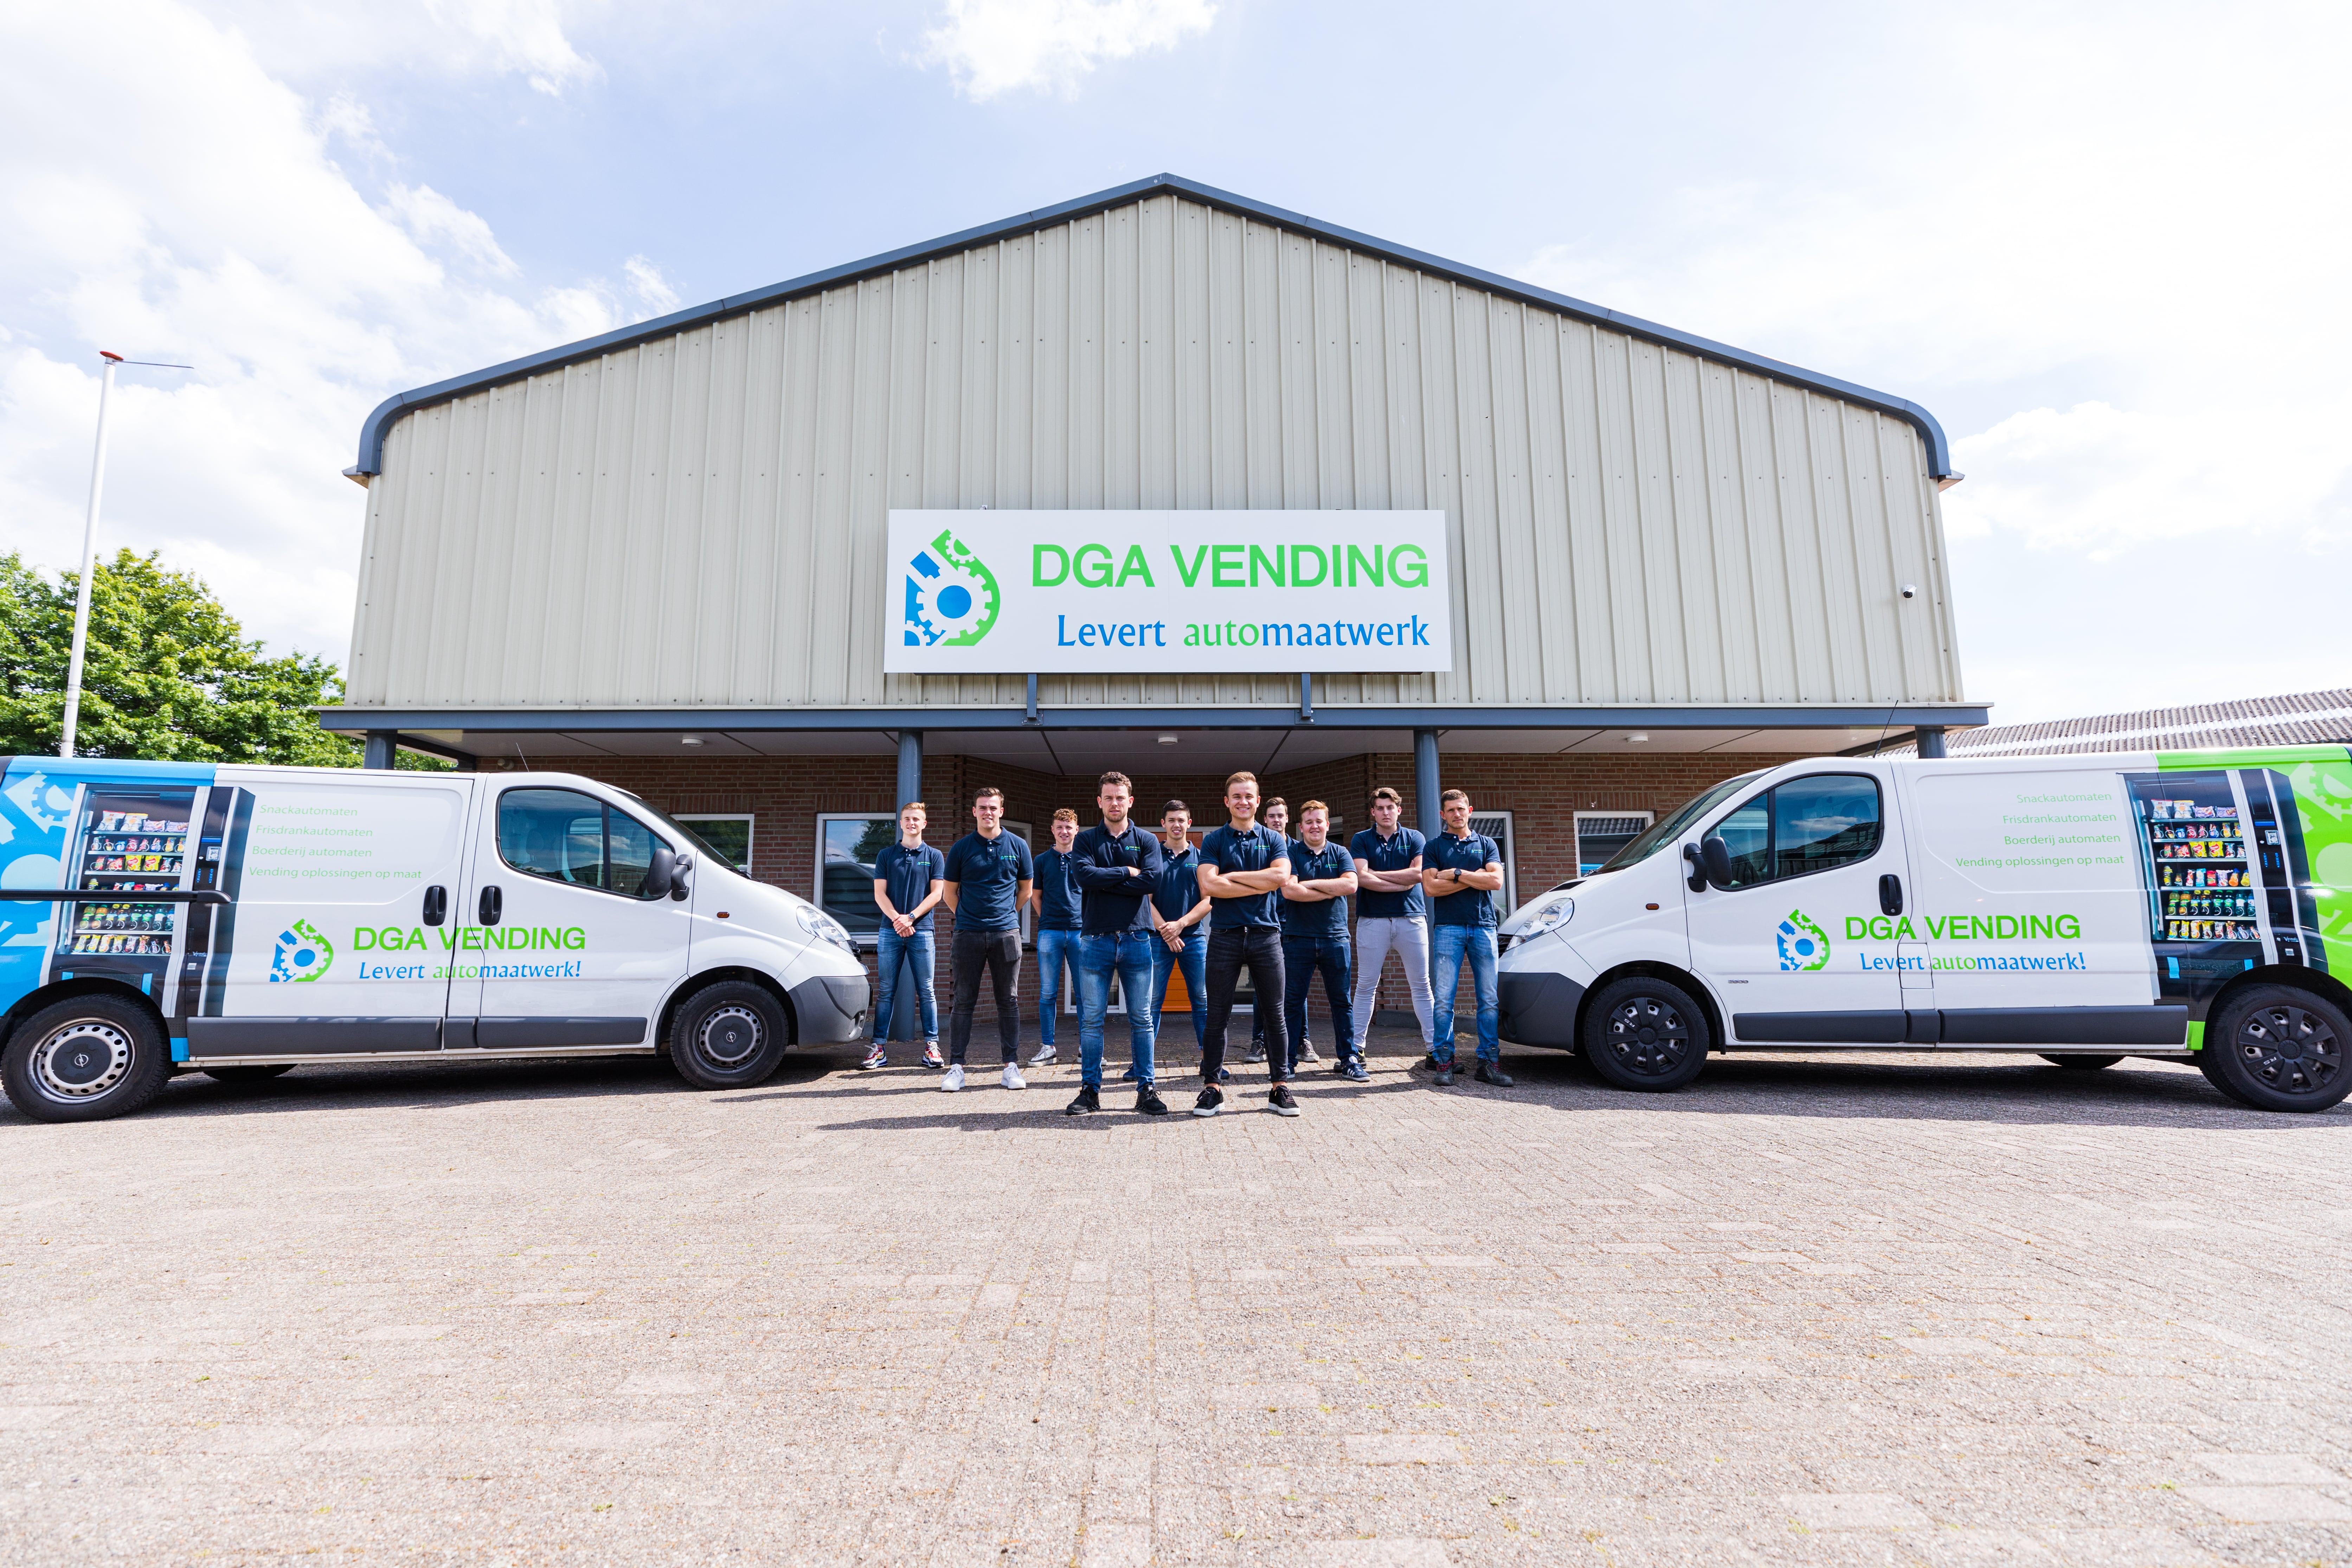 DGA vending over ons